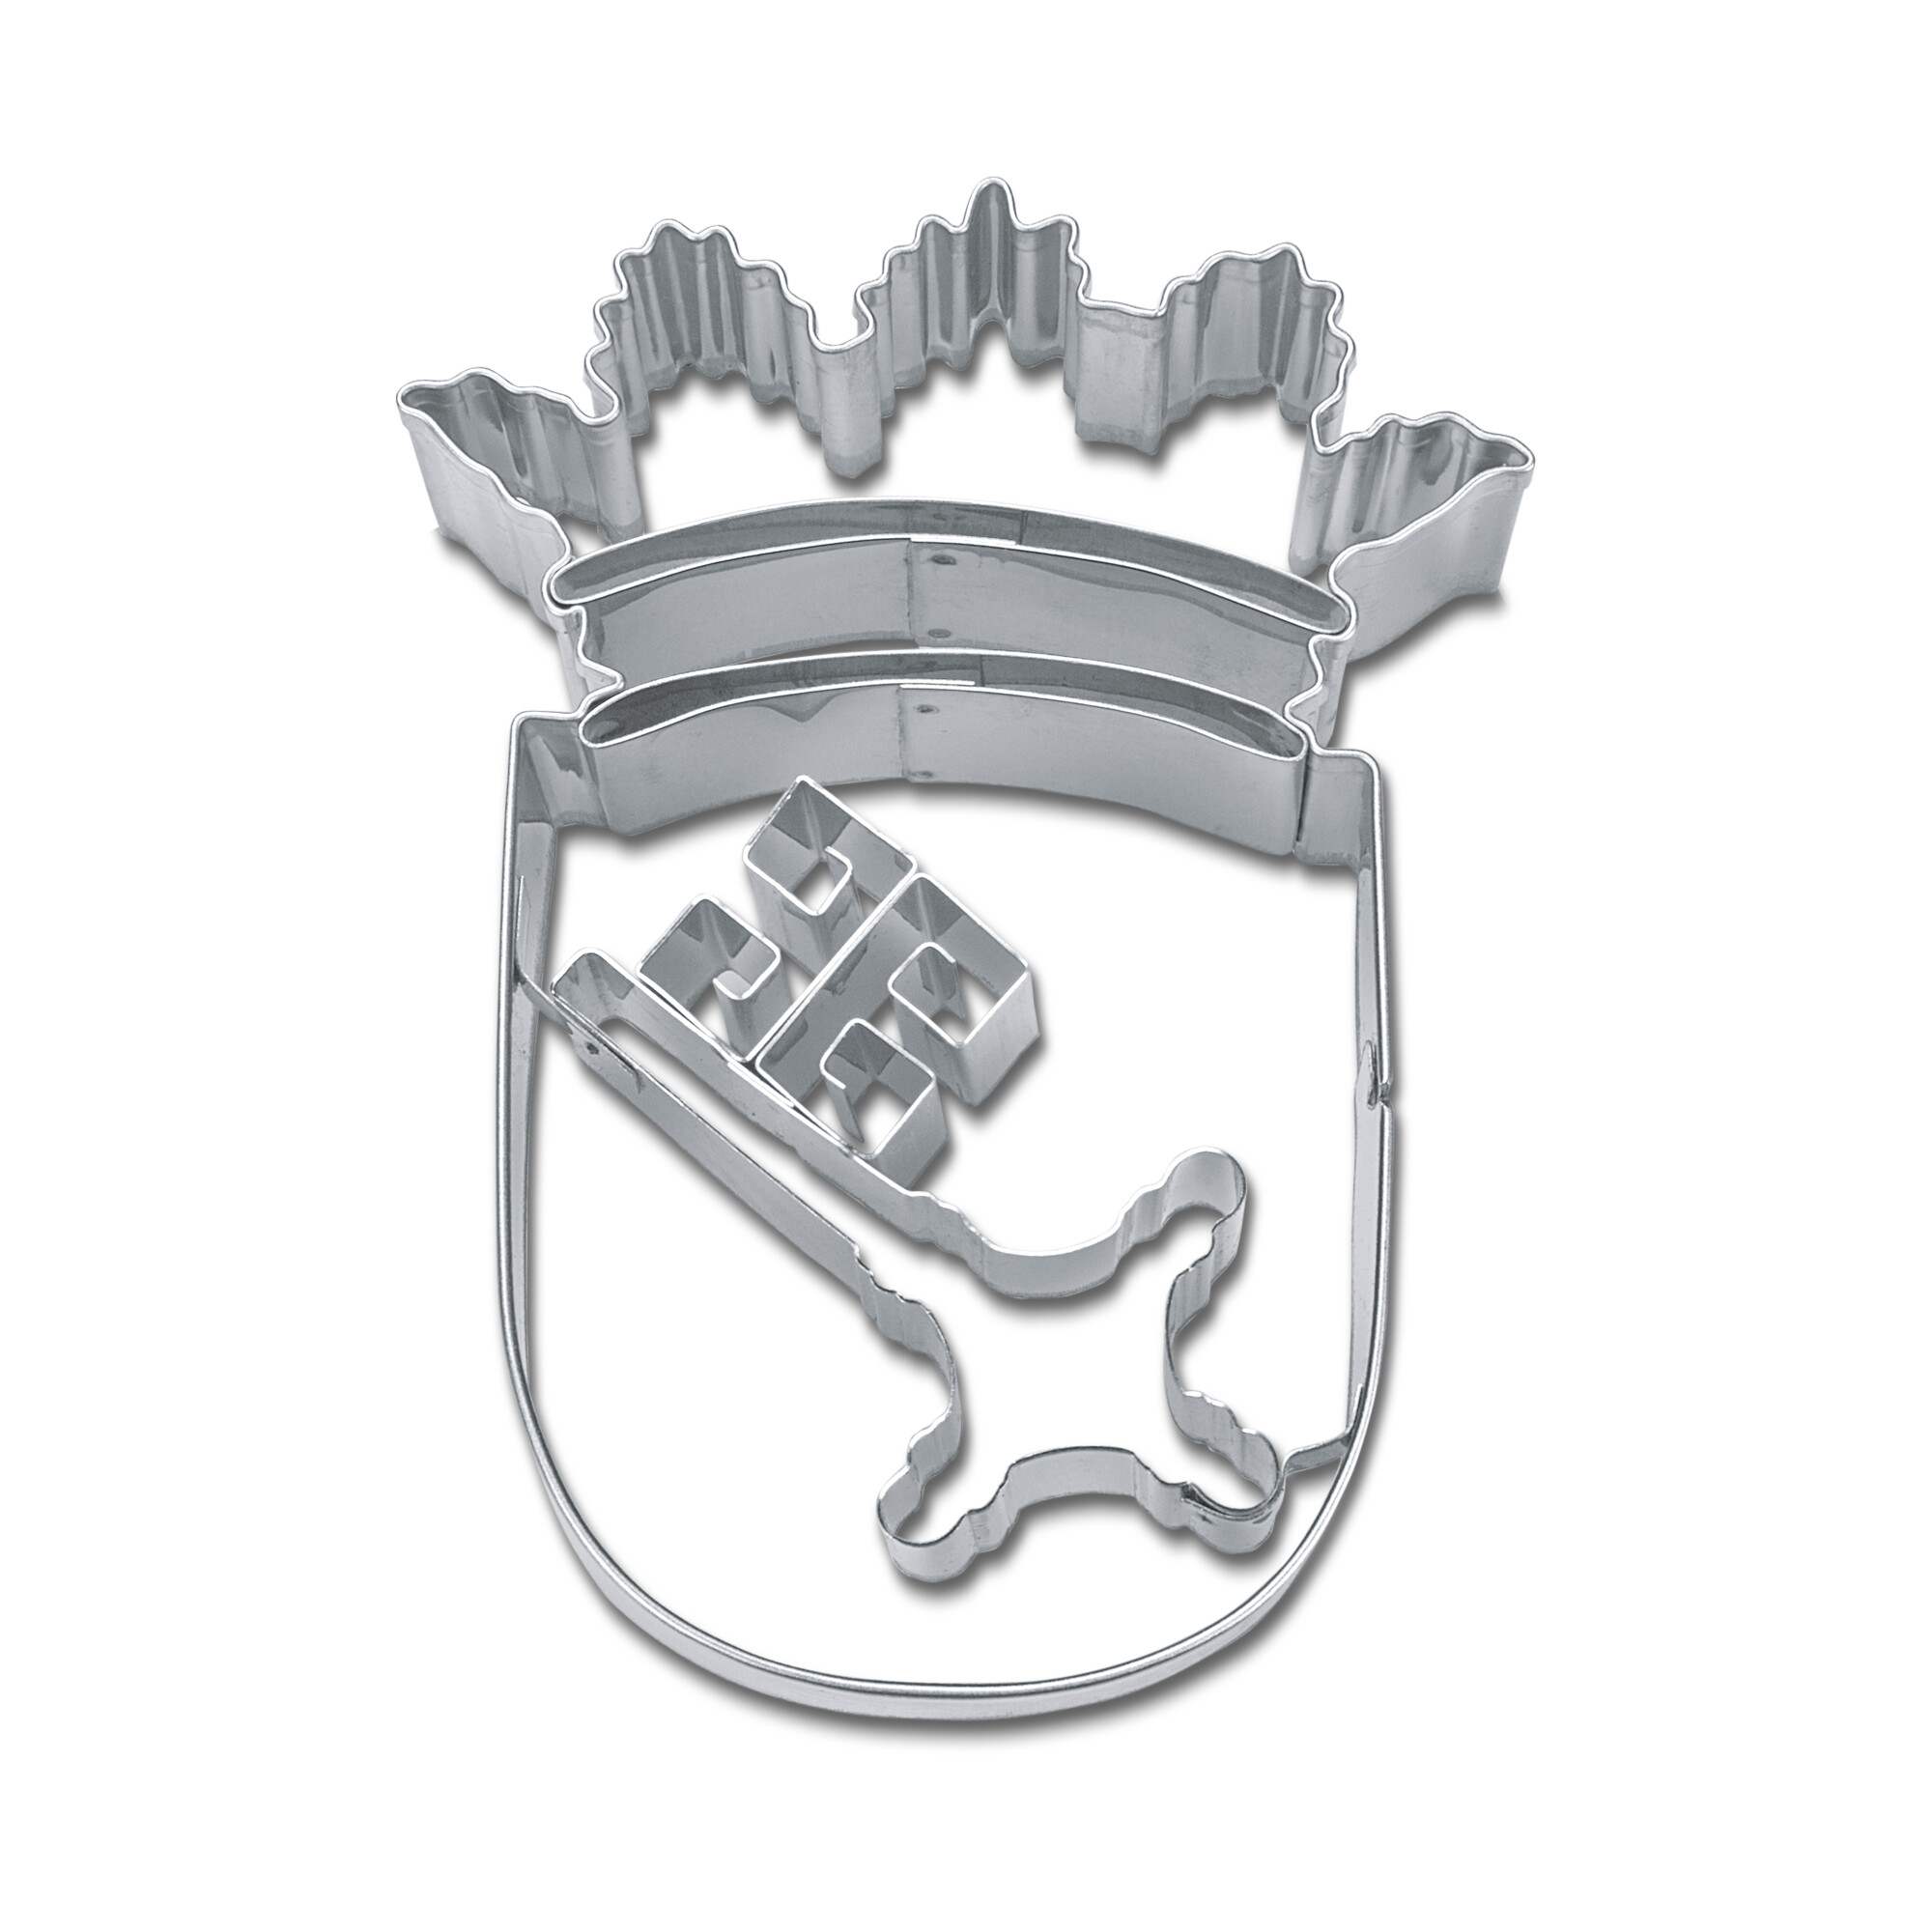 Cookie cutter with stamp – Bremen coat of arms